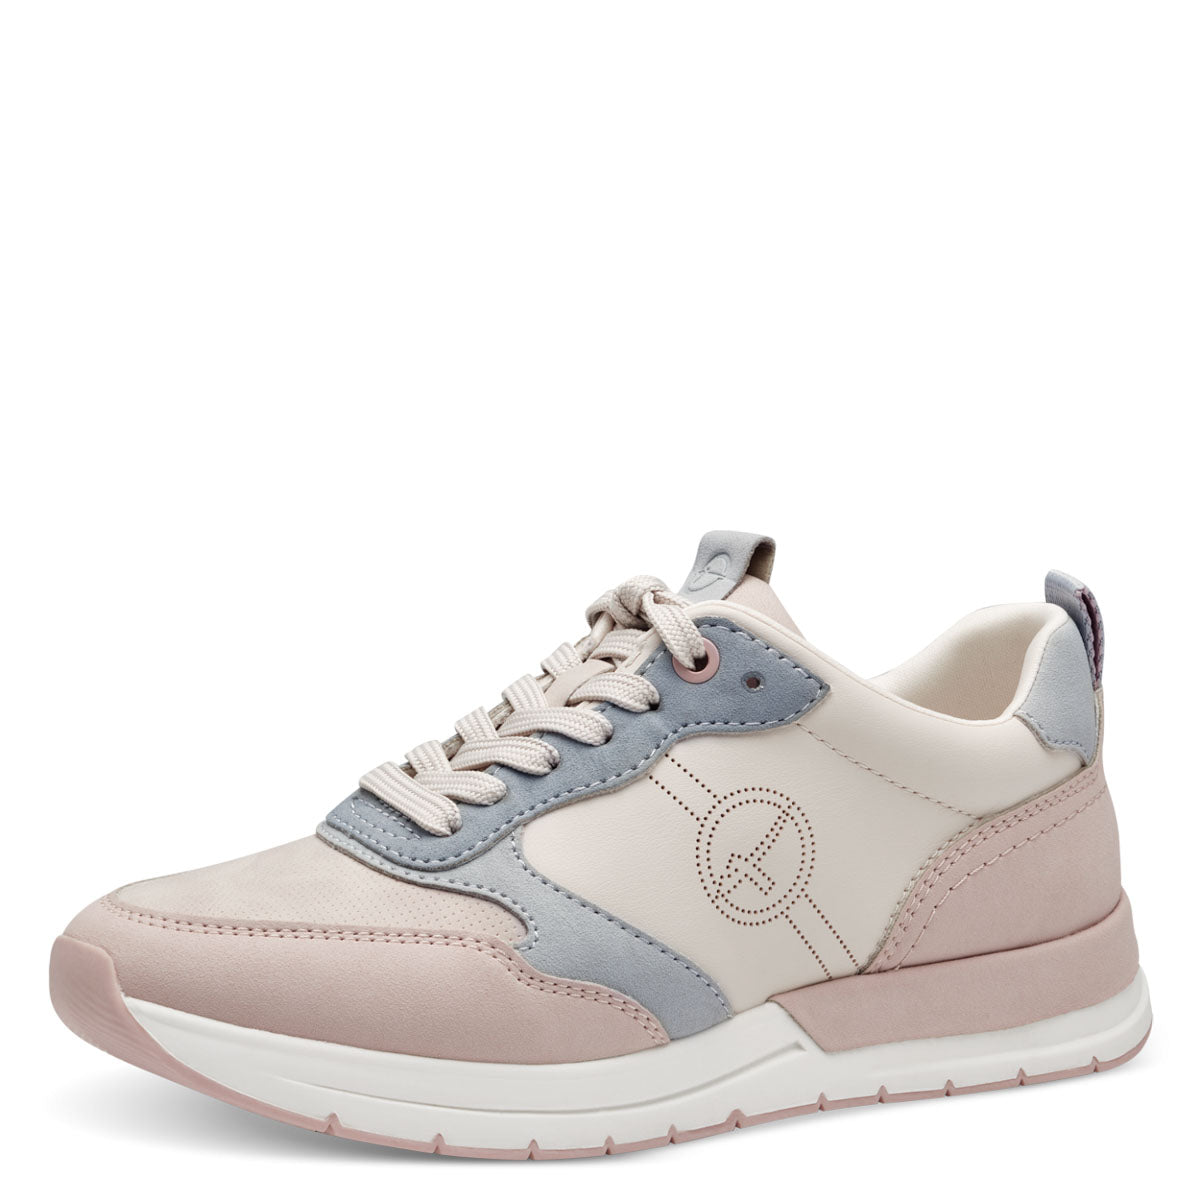  Side view of Tamaris runner, showing the elevated heel and pastel colour mix.